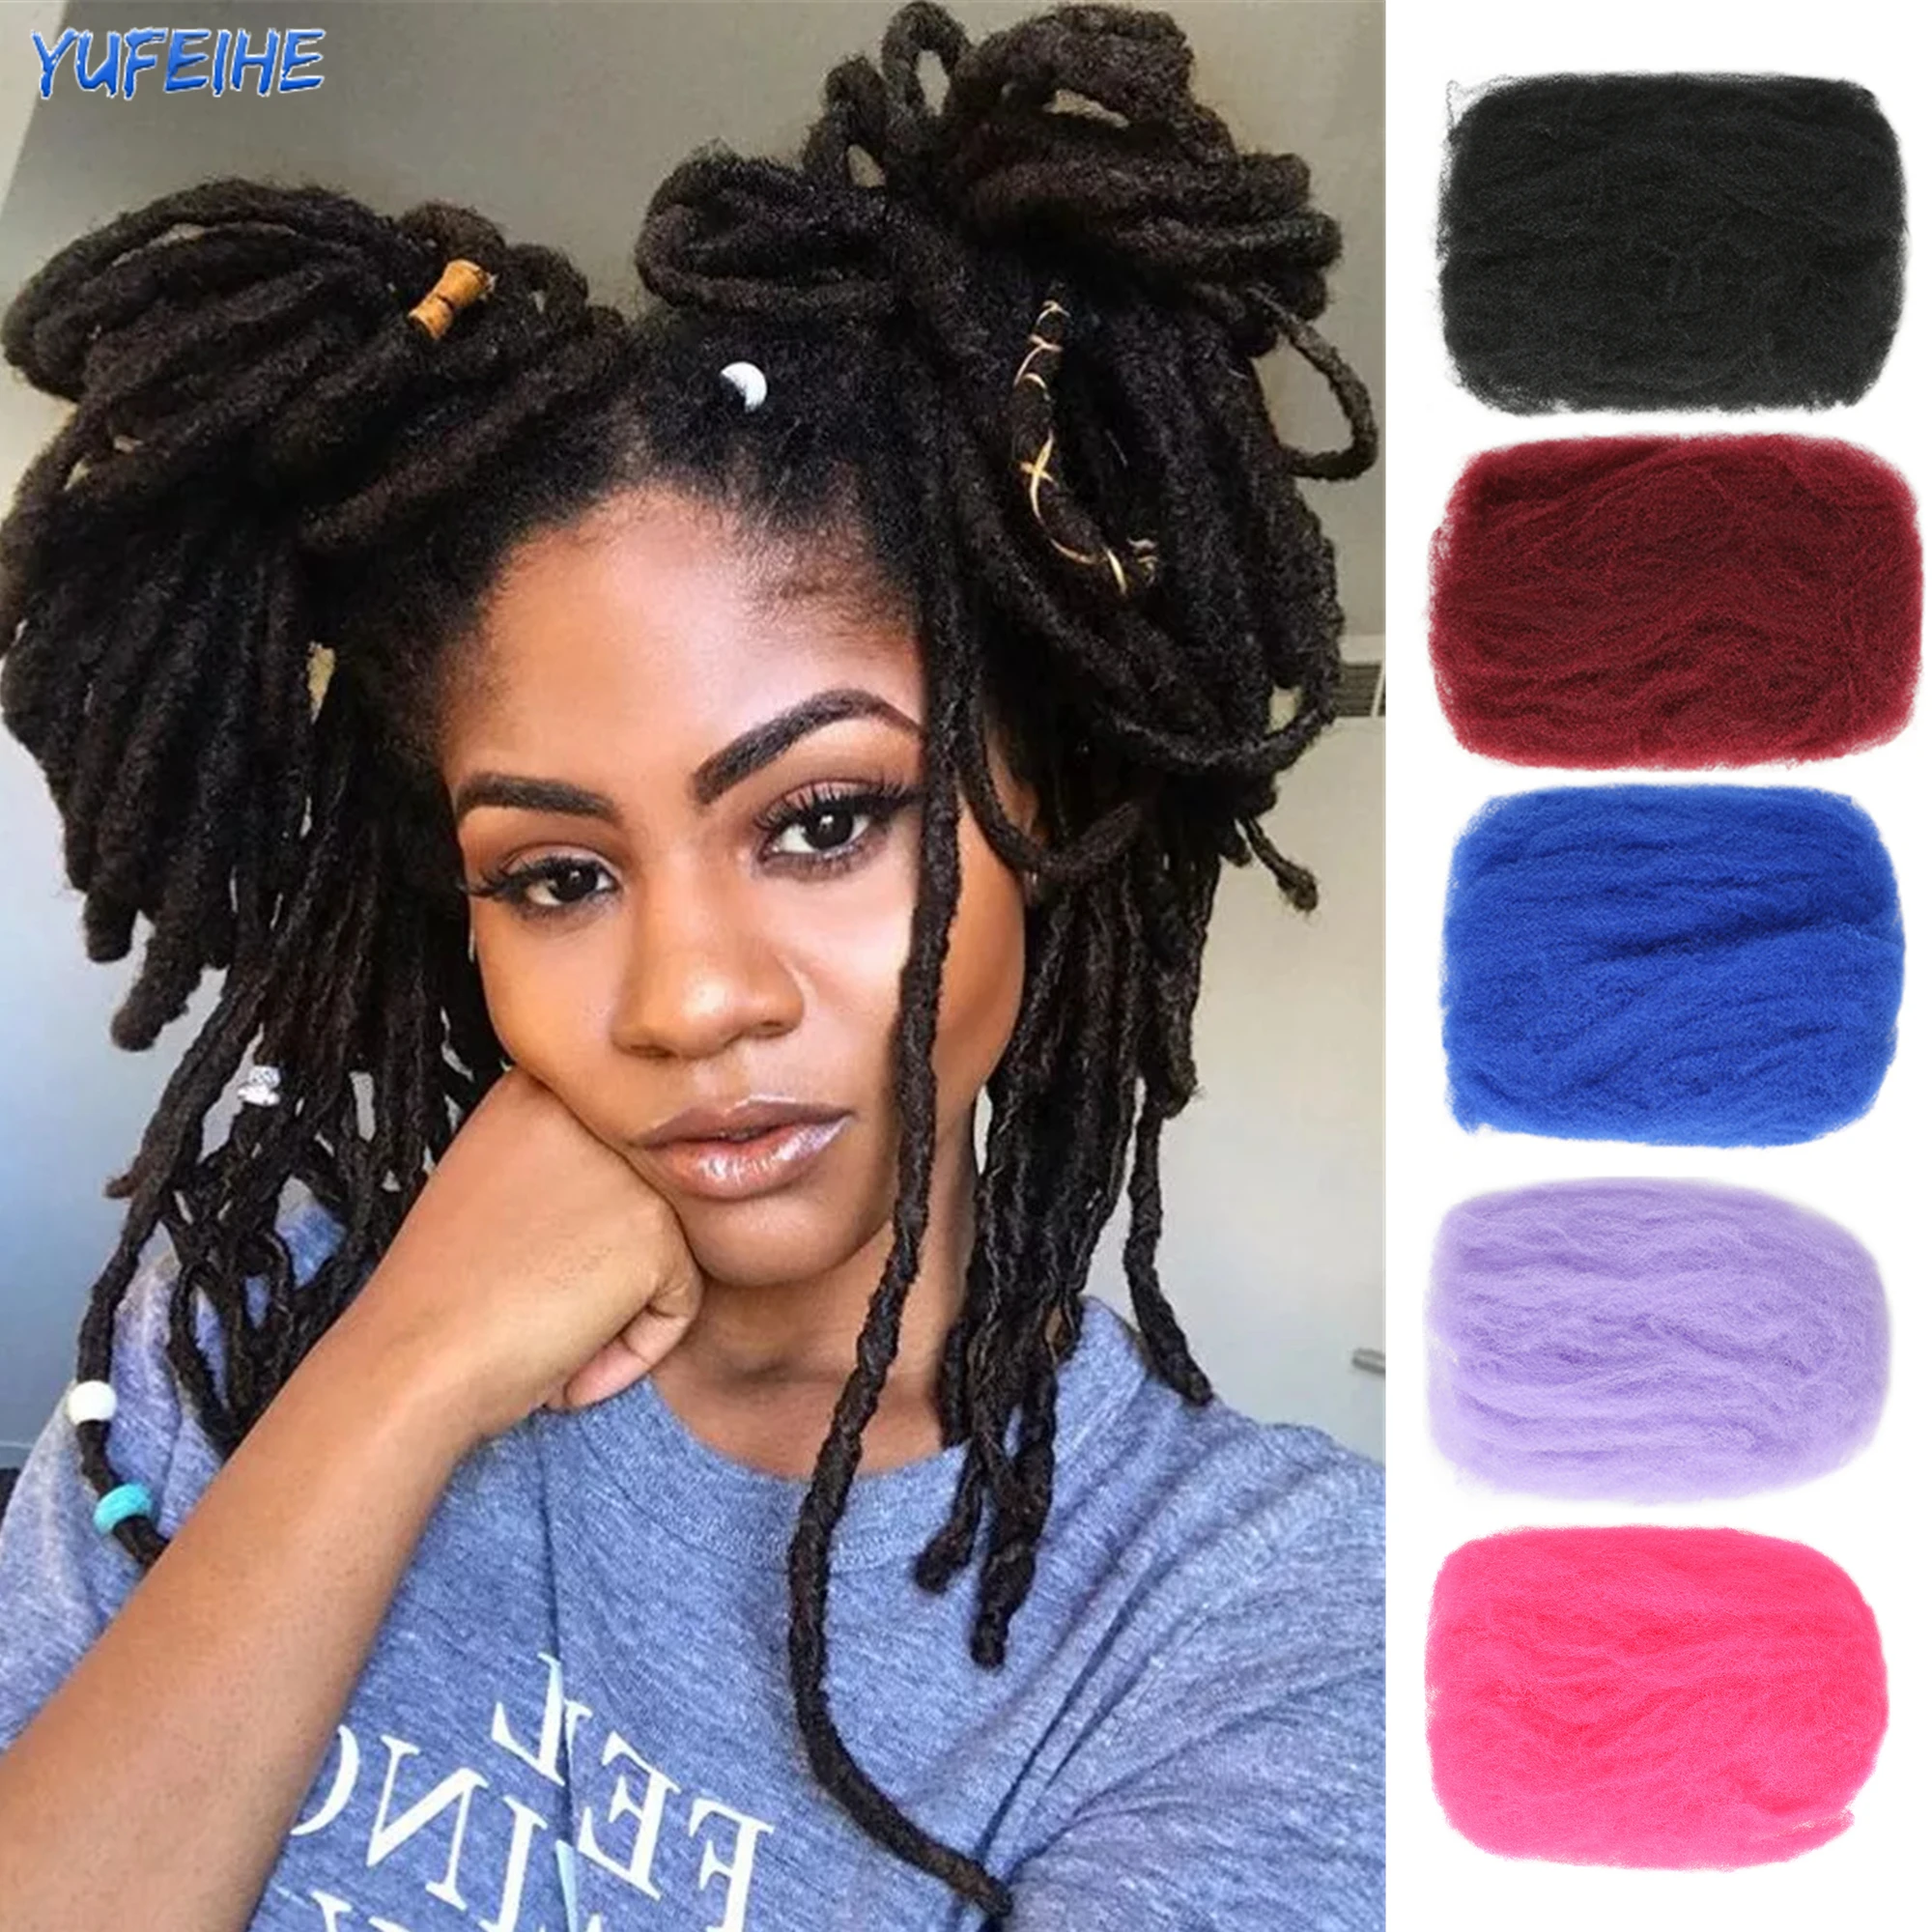 Brazilian Afro Kinky Curly Bulk Crochet Hair Synthetic Hook Braids Hair Extensions 50g/Pack Rainbow Colored Blue Pink Blonde